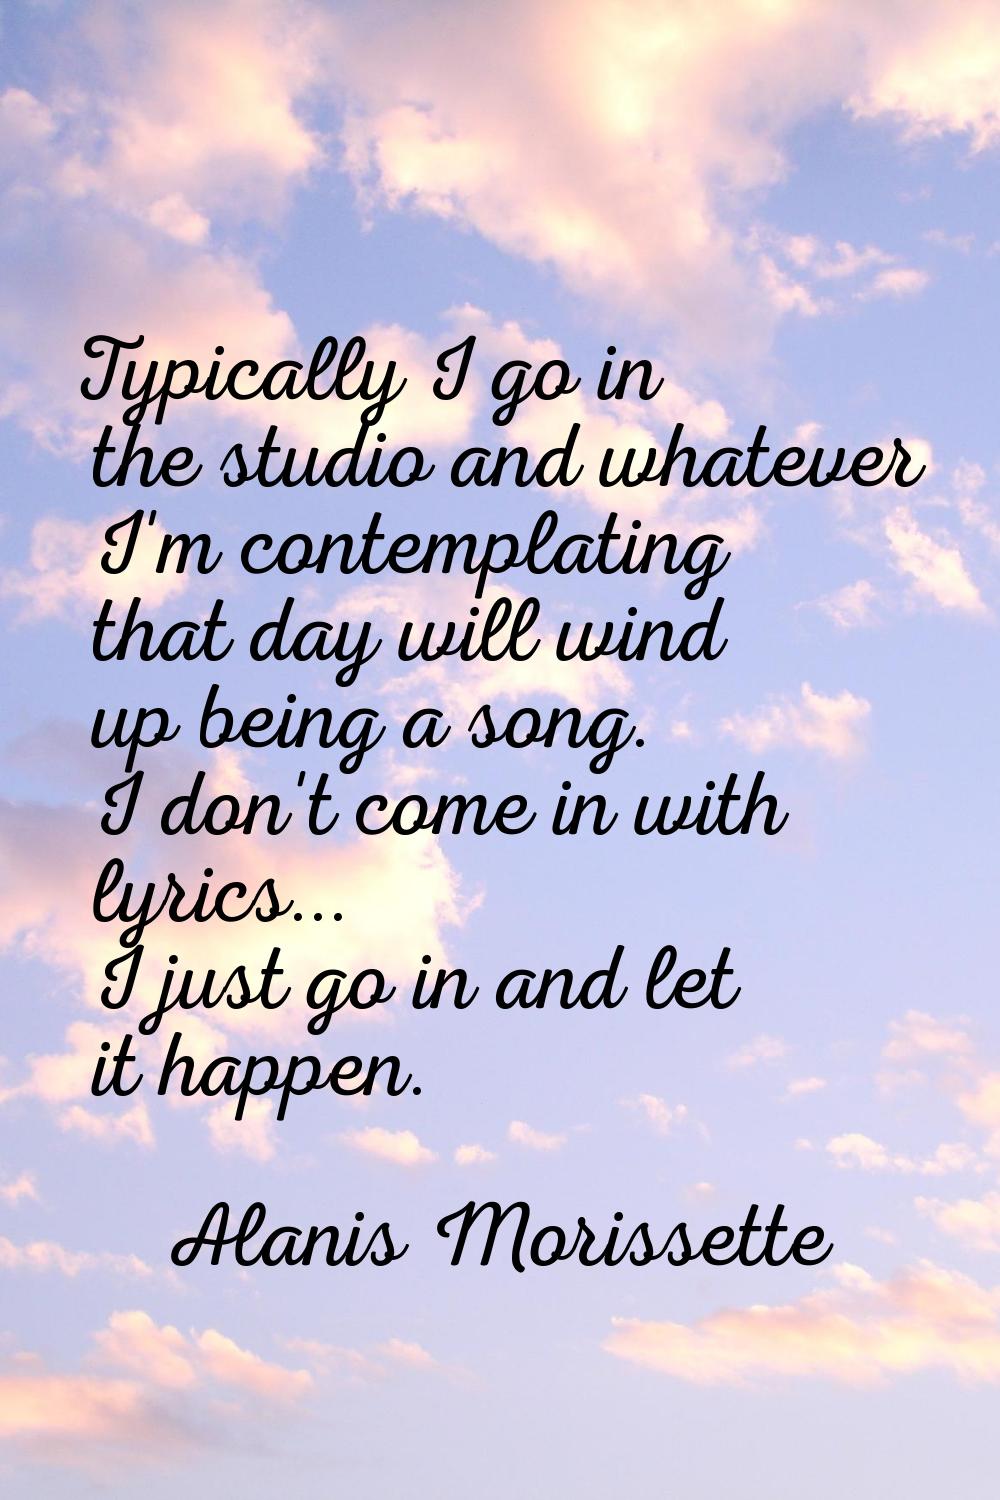 Typically I go in the studio and whatever I'm contemplating that day will wind up being a song. I d